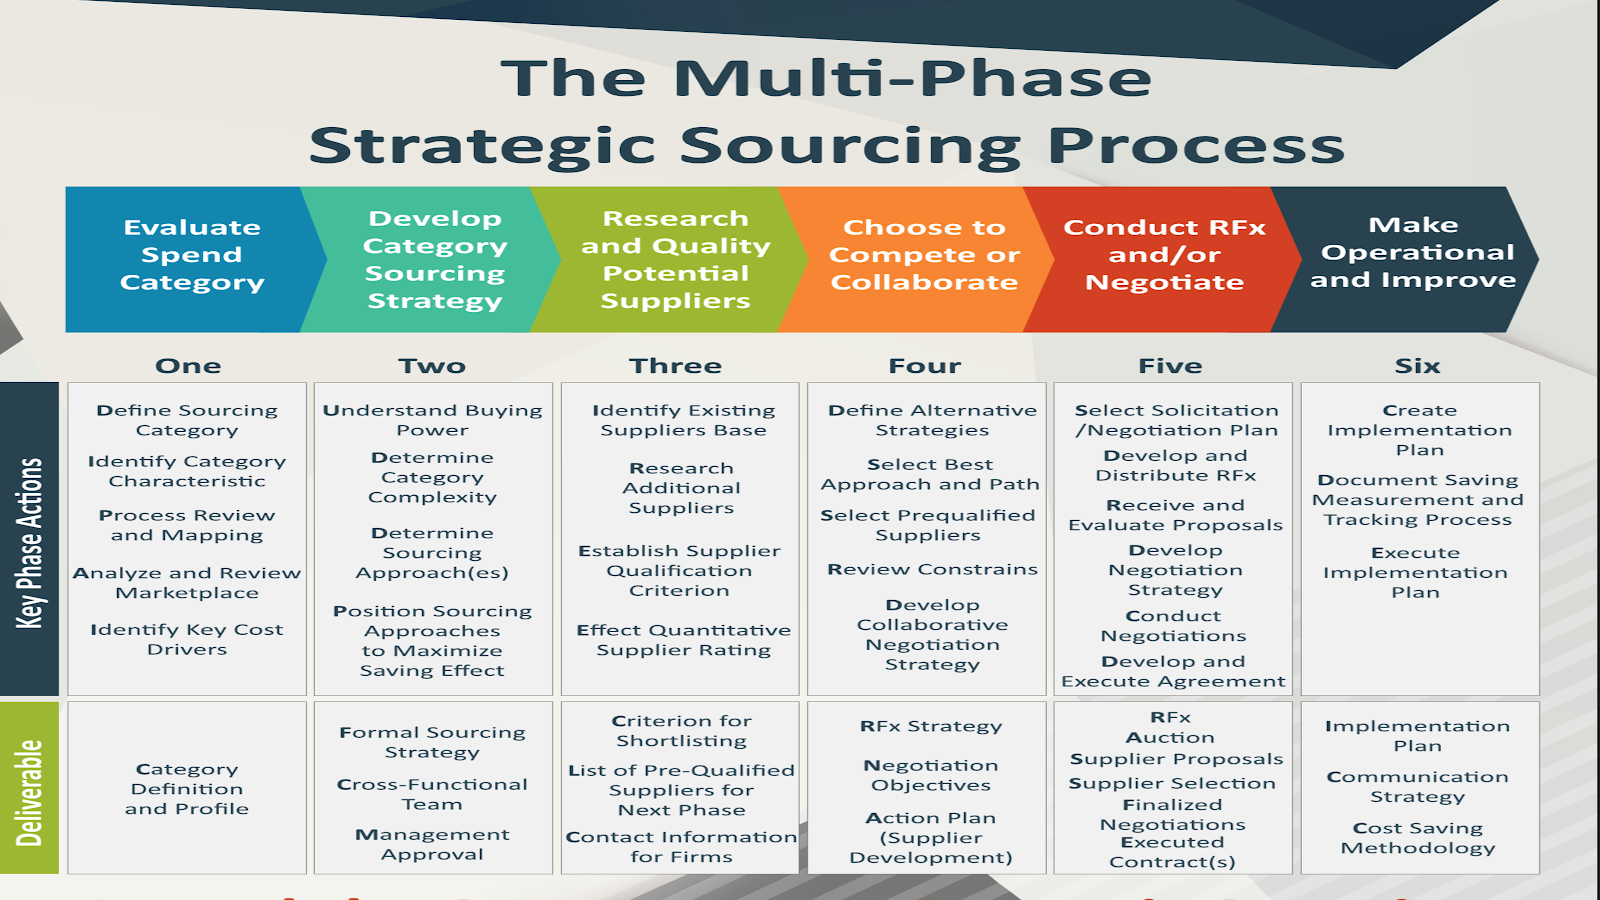 The Strategic Sourcing Process